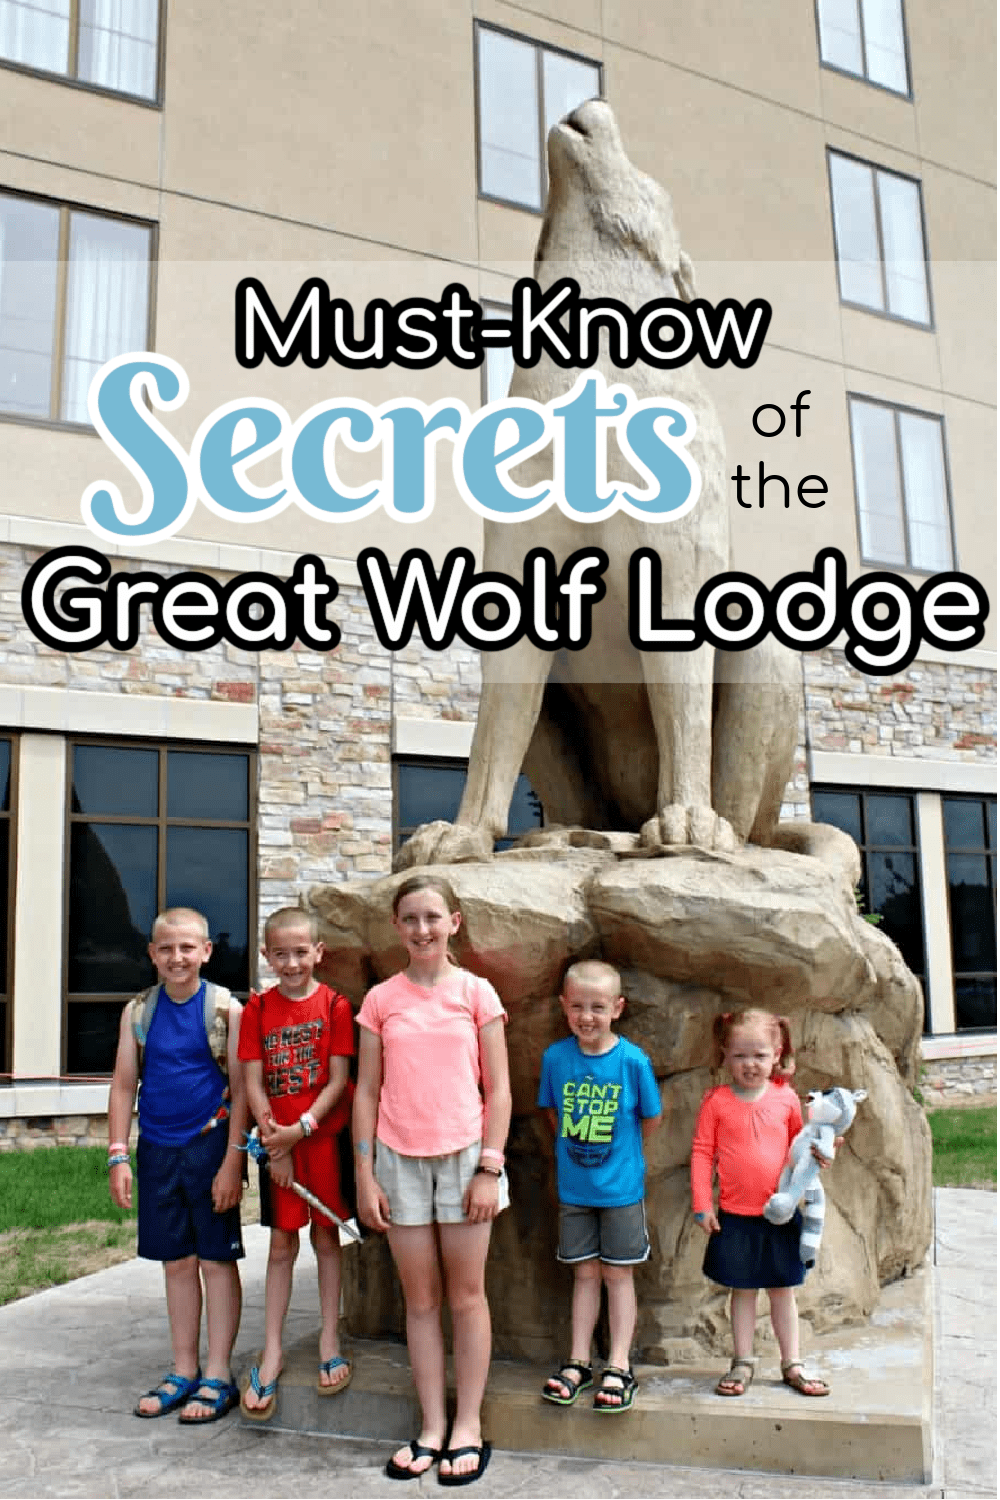 Must-Know Secrets of the Great Wolf Lodge